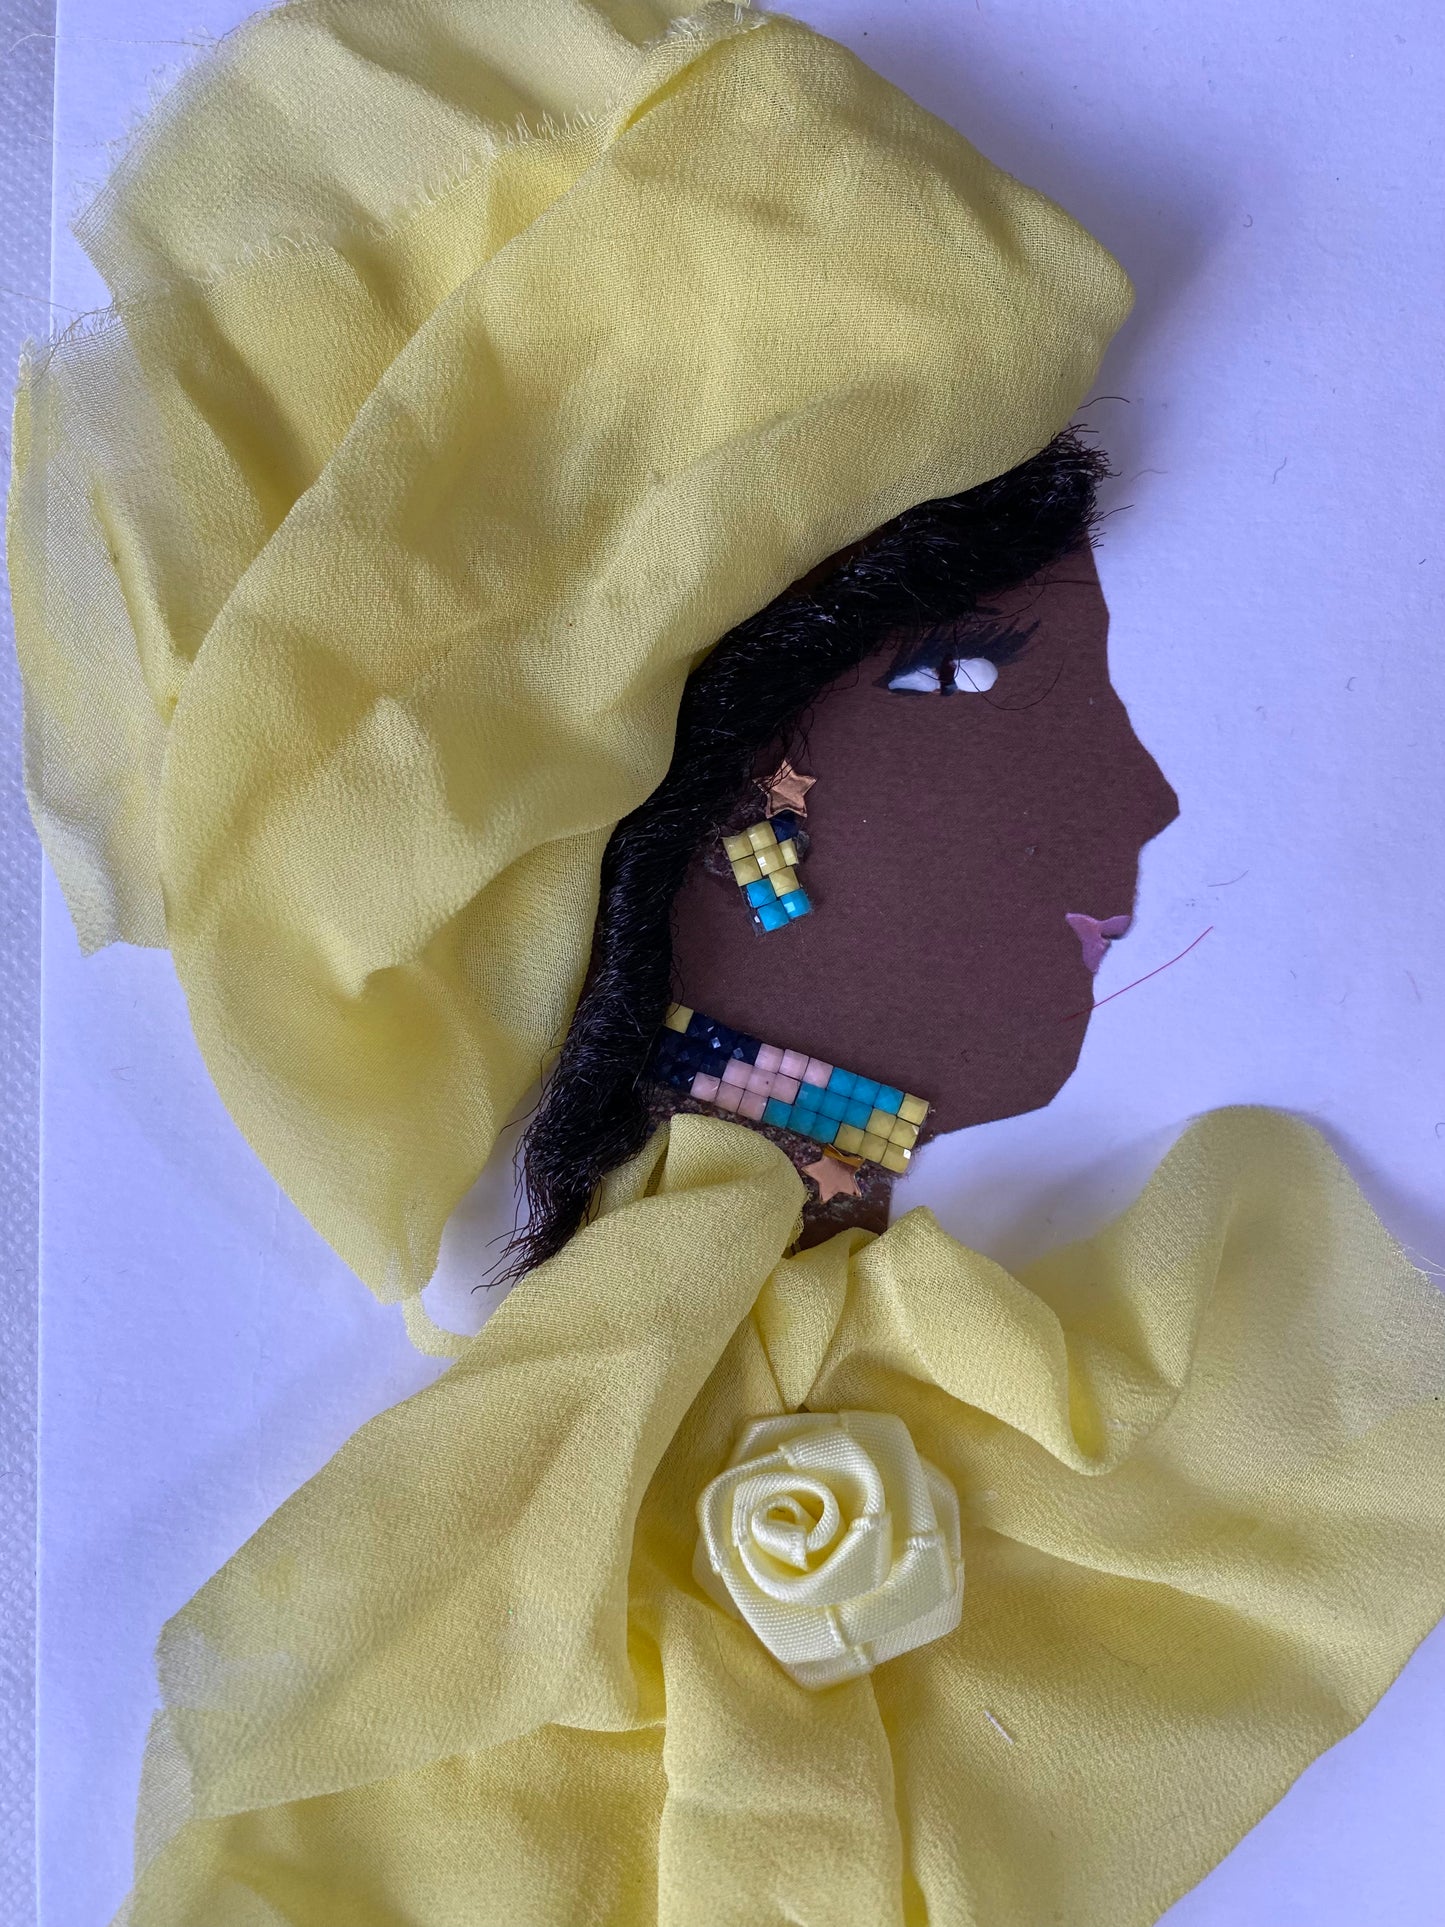 I designed this card of a woman named Dr. Boston Manor. She has a black skin tone and is wearing a delicate yellow head wrap. She is wearing a matching yellow blouse with a flower in the middle. She wears colorful jewellery to finish the look.